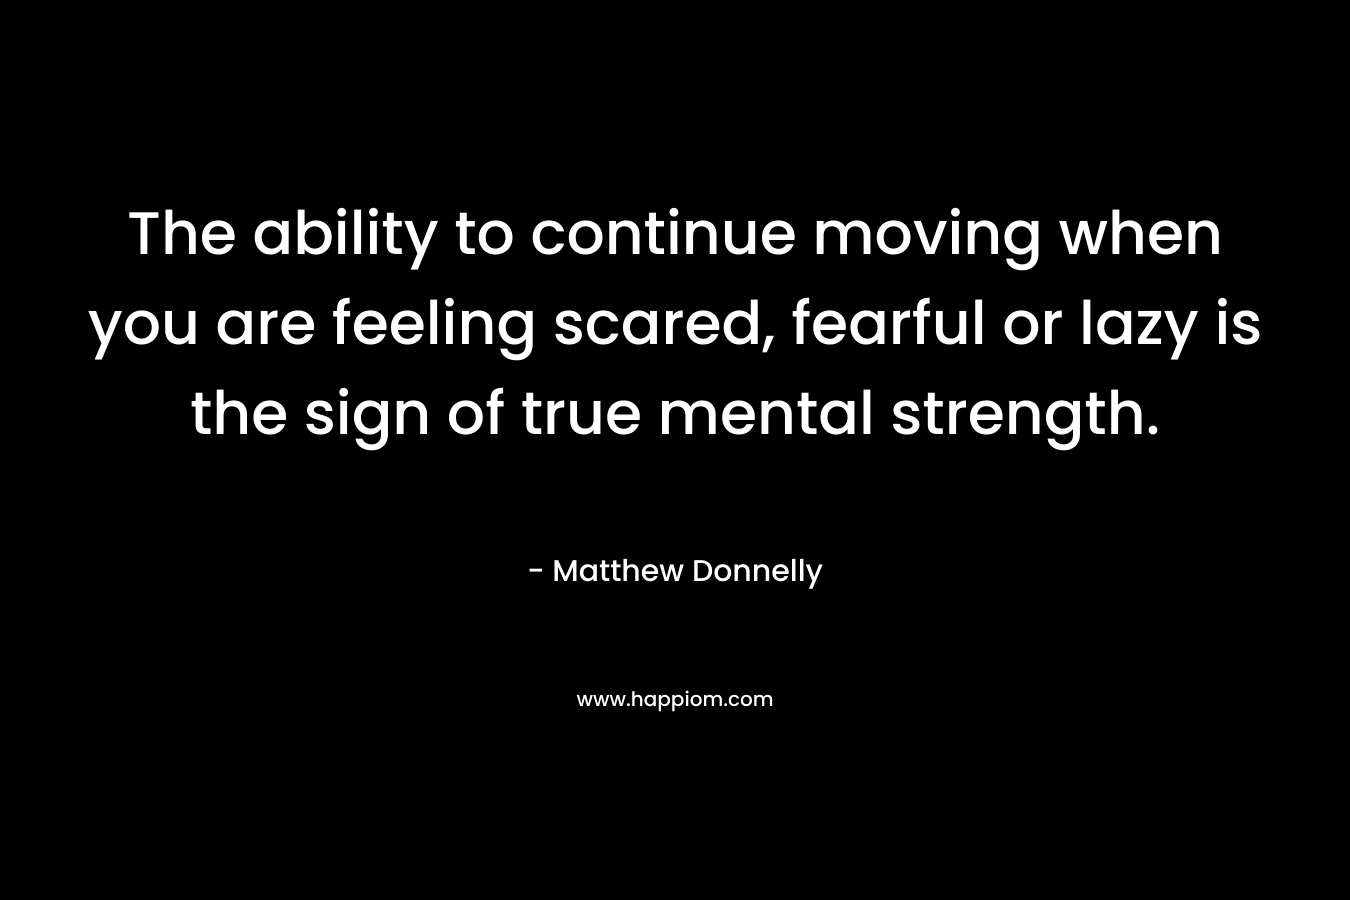 The ability to continue moving when you are feeling scared, fearful or lazy is the sign of true mental strength.